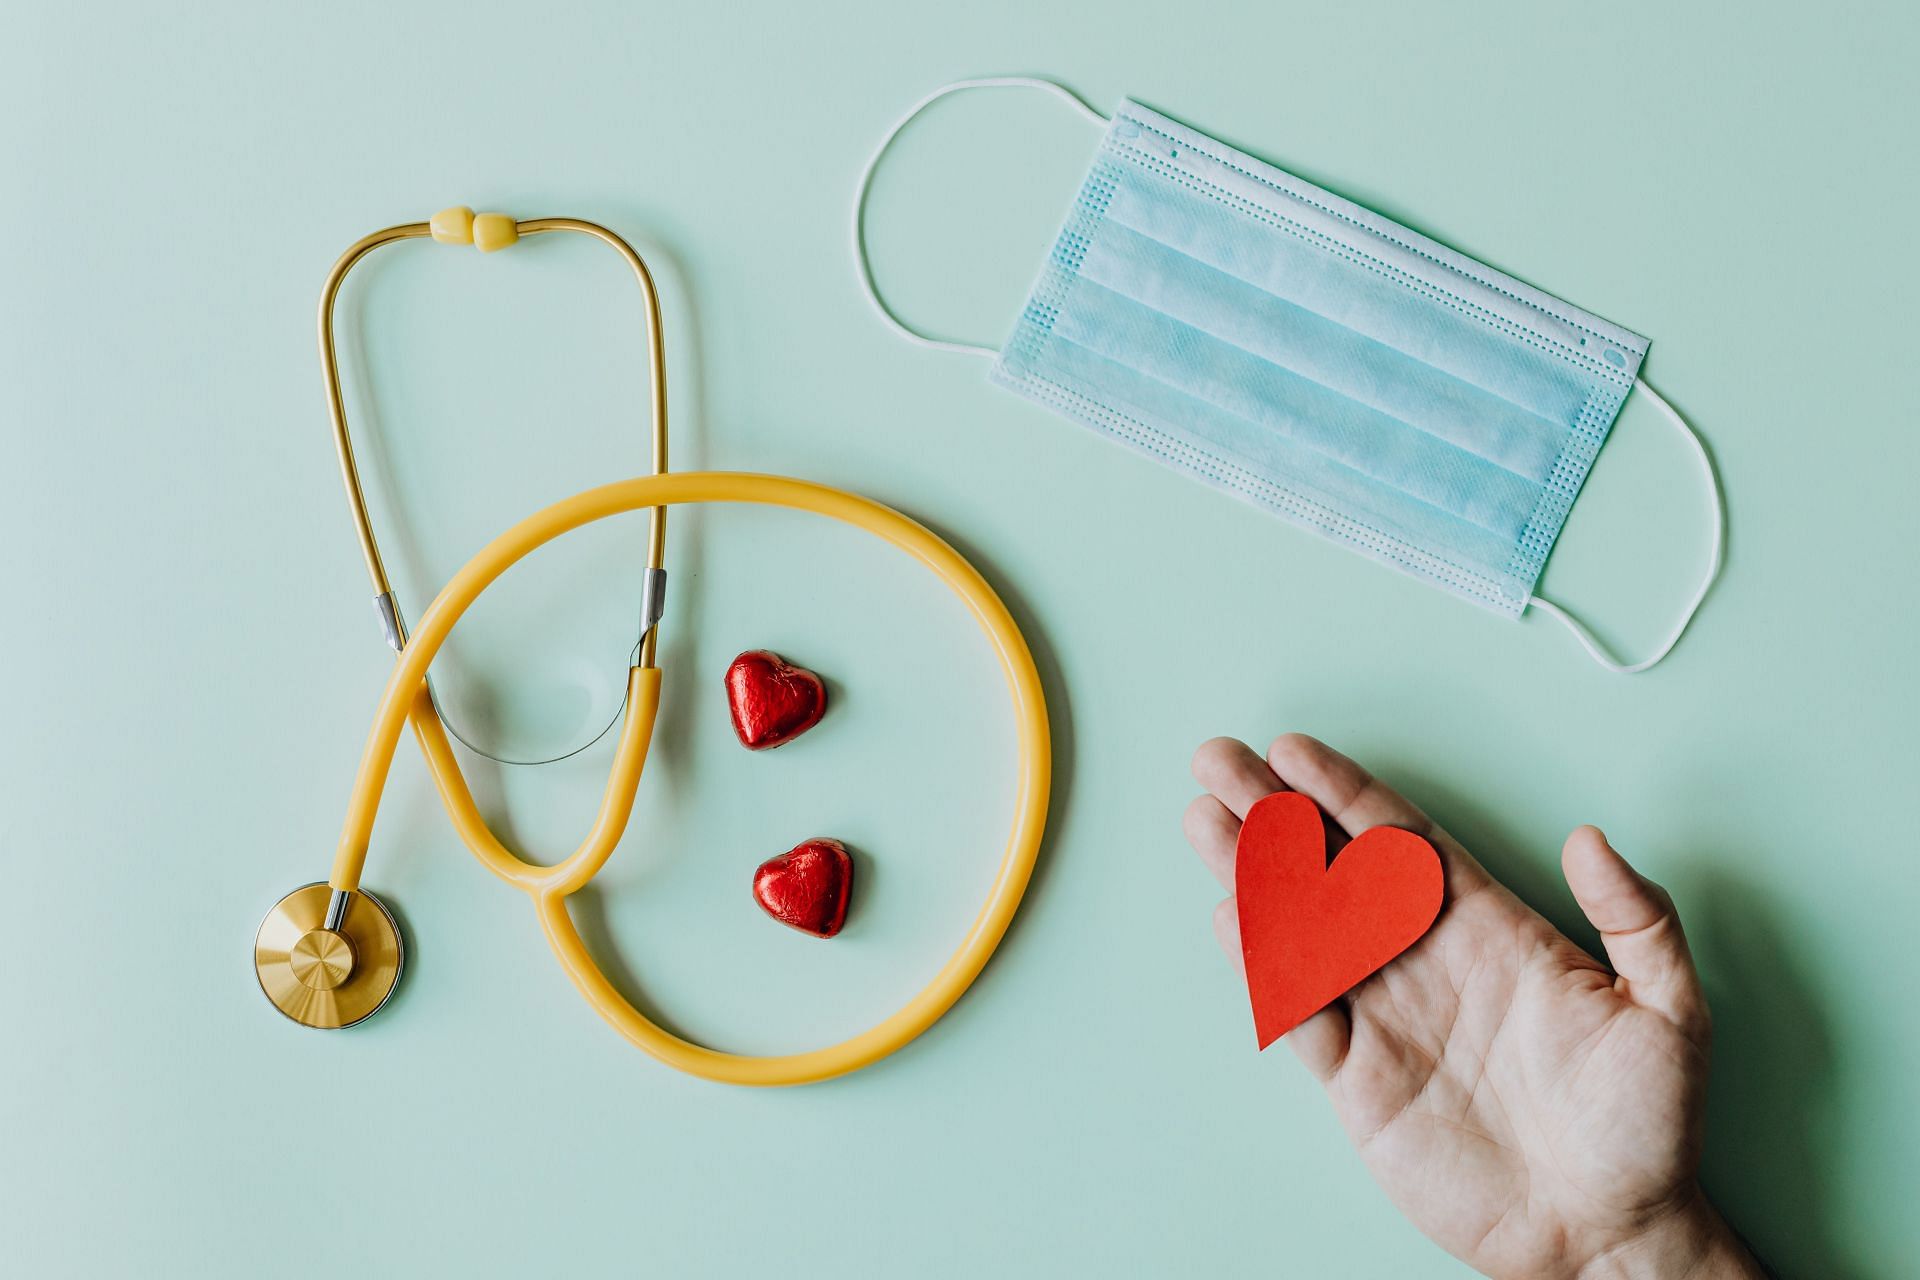 A universal healthcare system would provide coverage to all Americans regardless of their income level. (Photo by Karolina Grabowska/pexels)